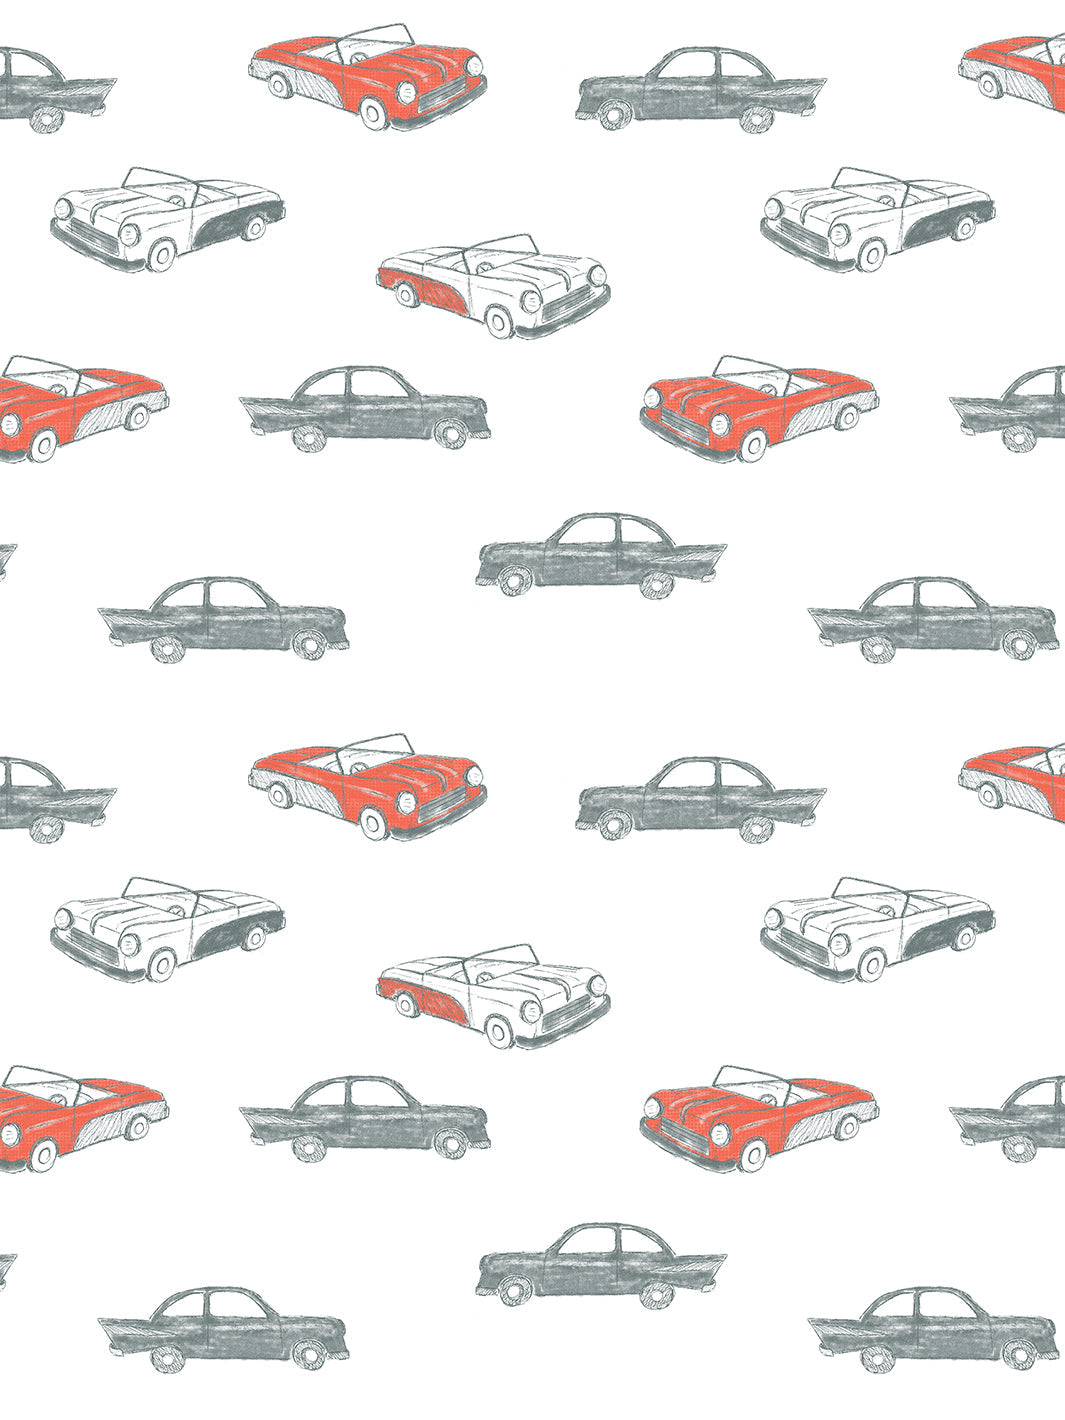 'Classic Cars' Wallpaper by Tea Collection - Retro Red